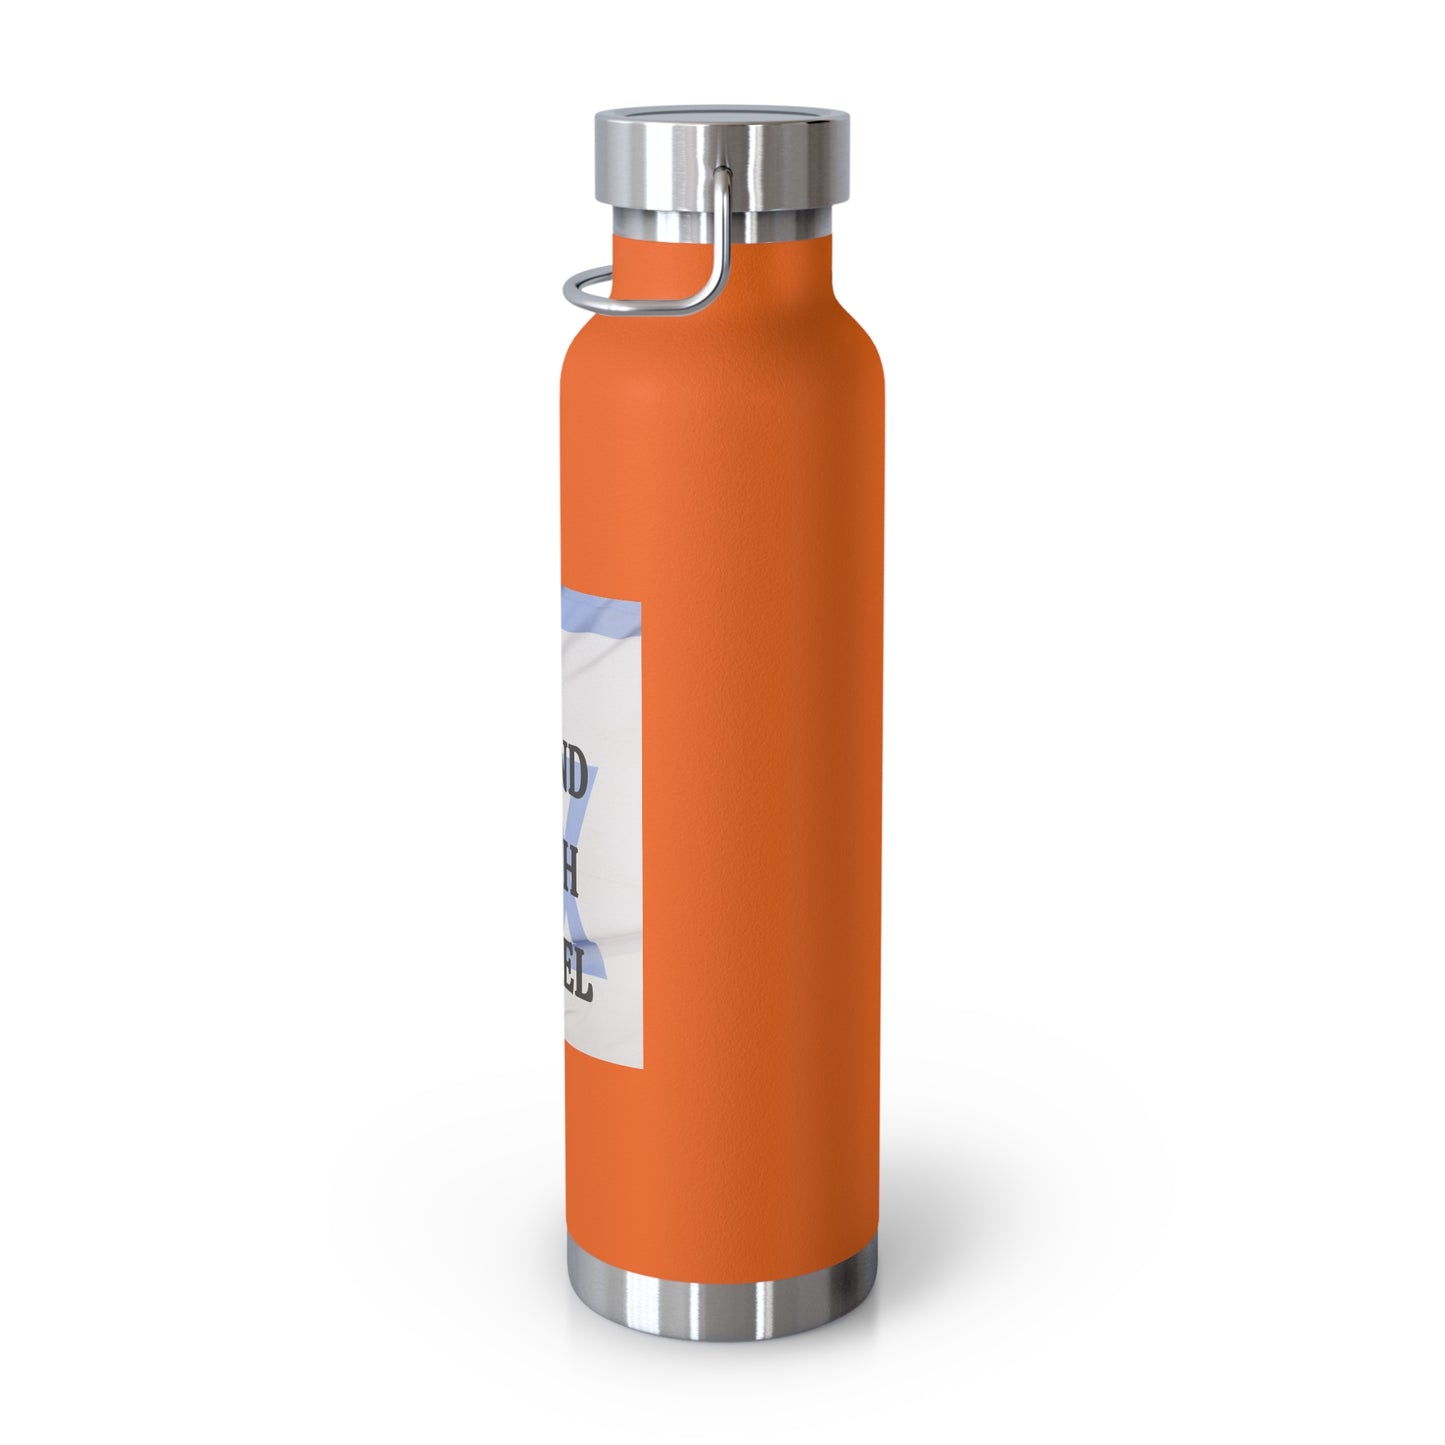 I stand with Israel - Copper Vacuum Insulated Bottle, 22oz